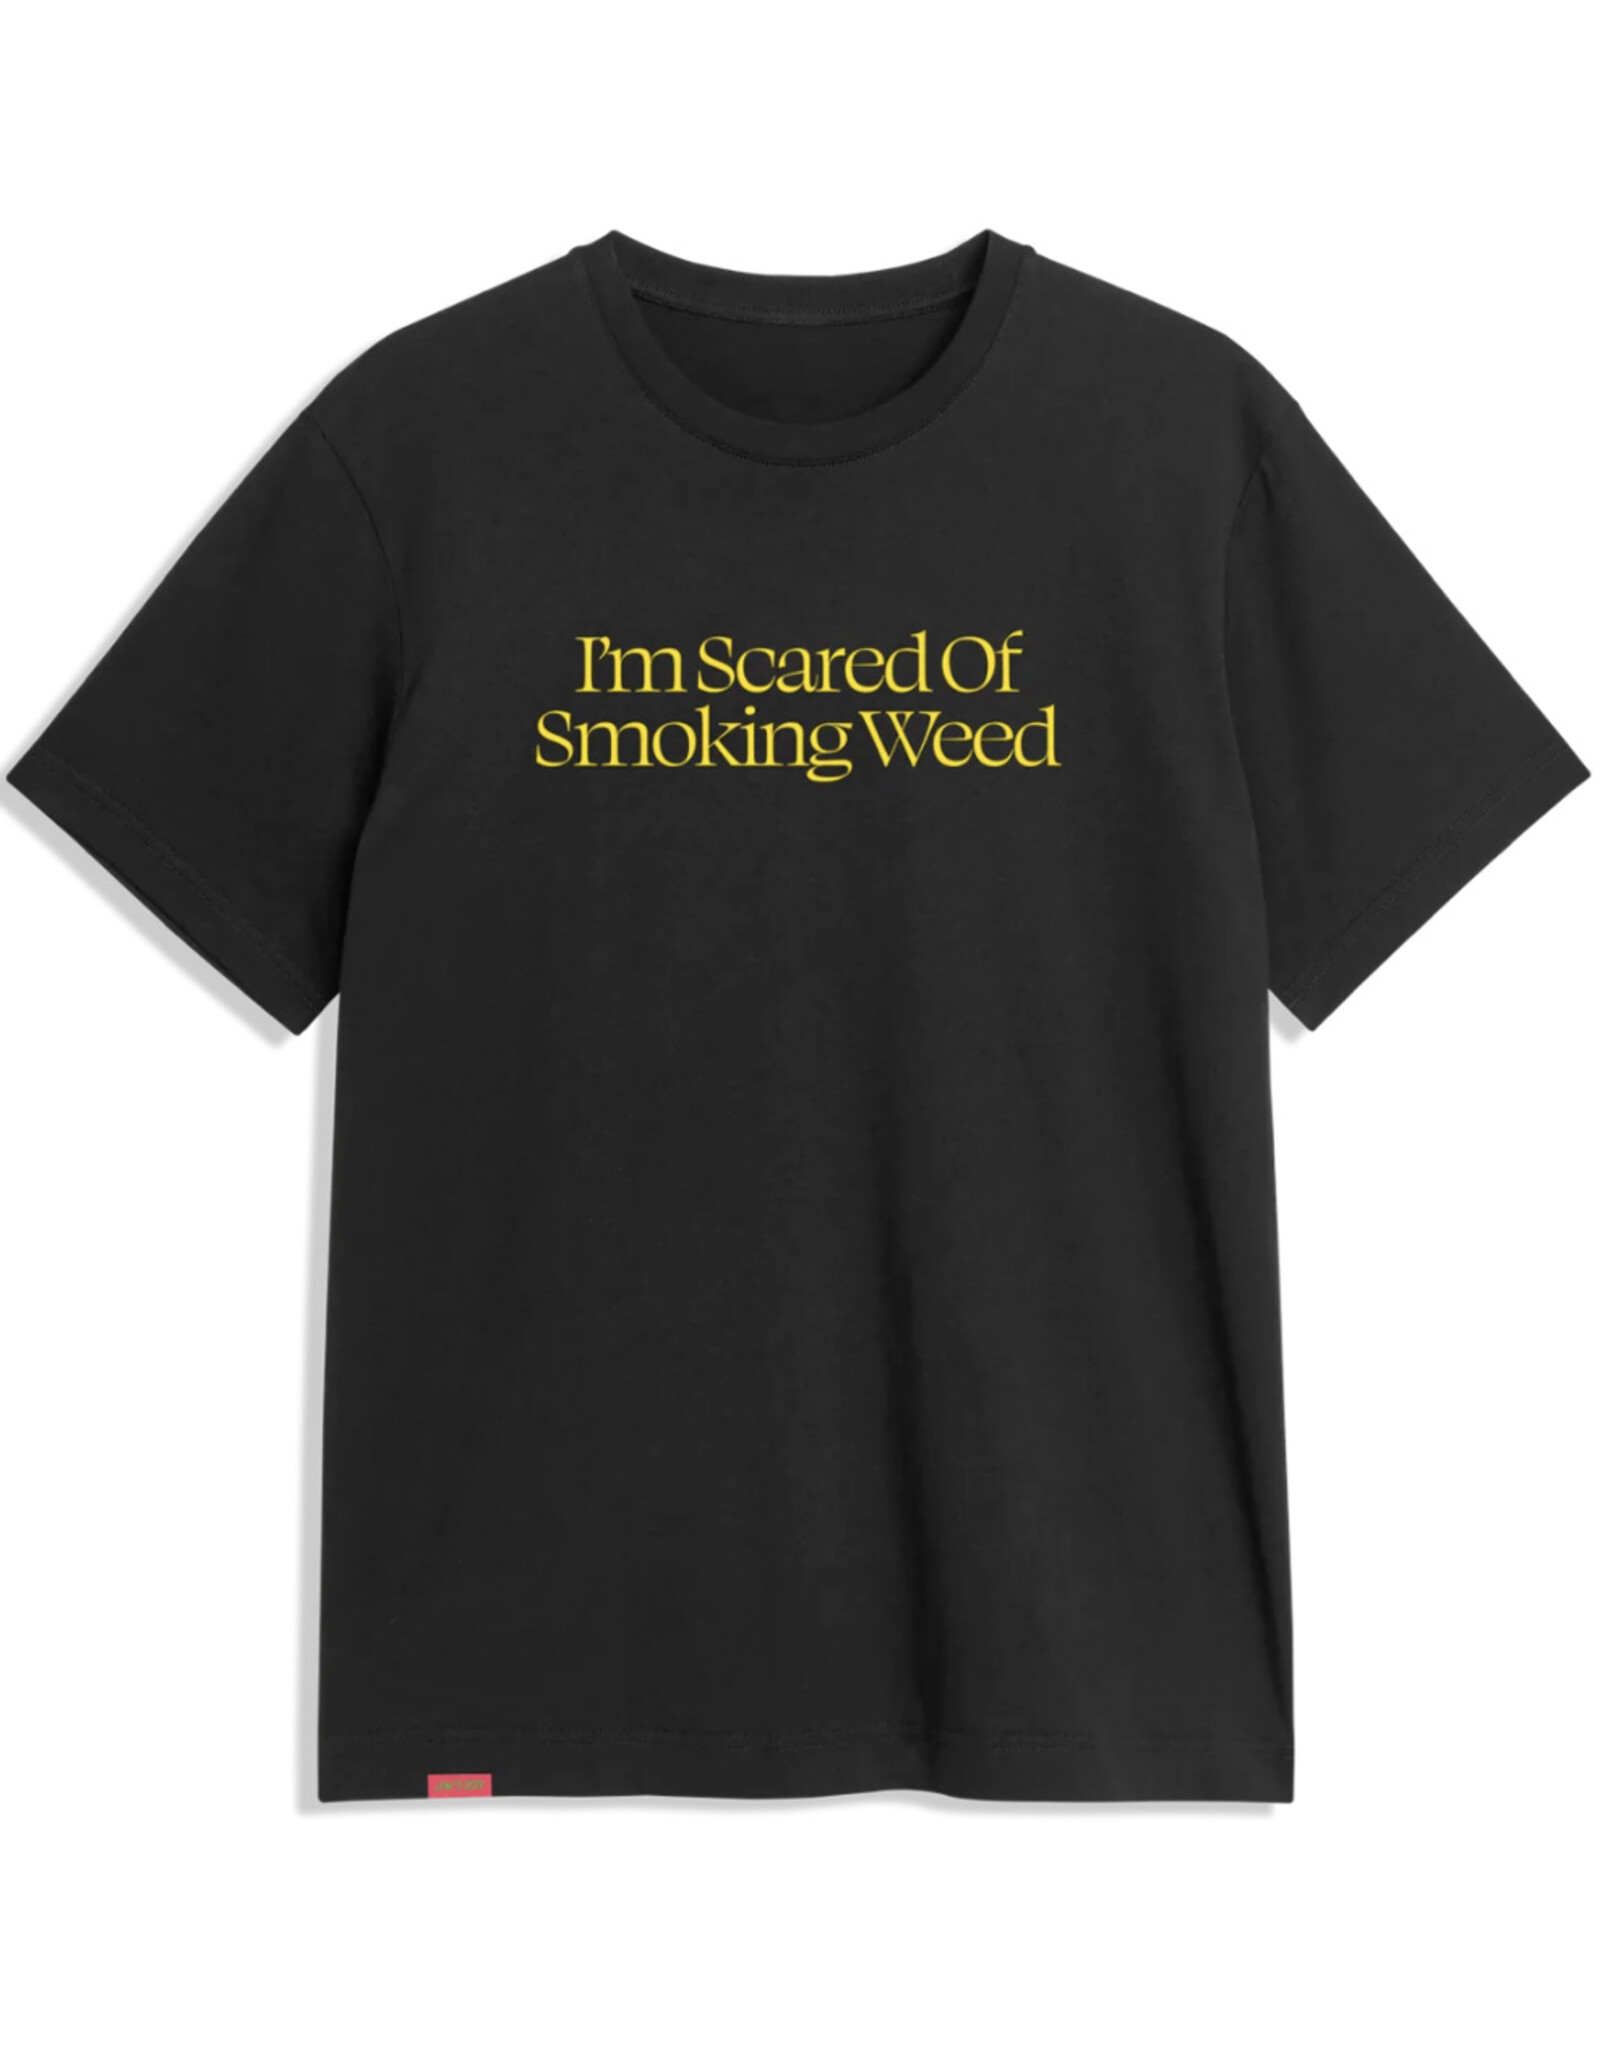 JACUZZI UNLIMITED JACUZZI SCARED OF WEED TEE - BLACK